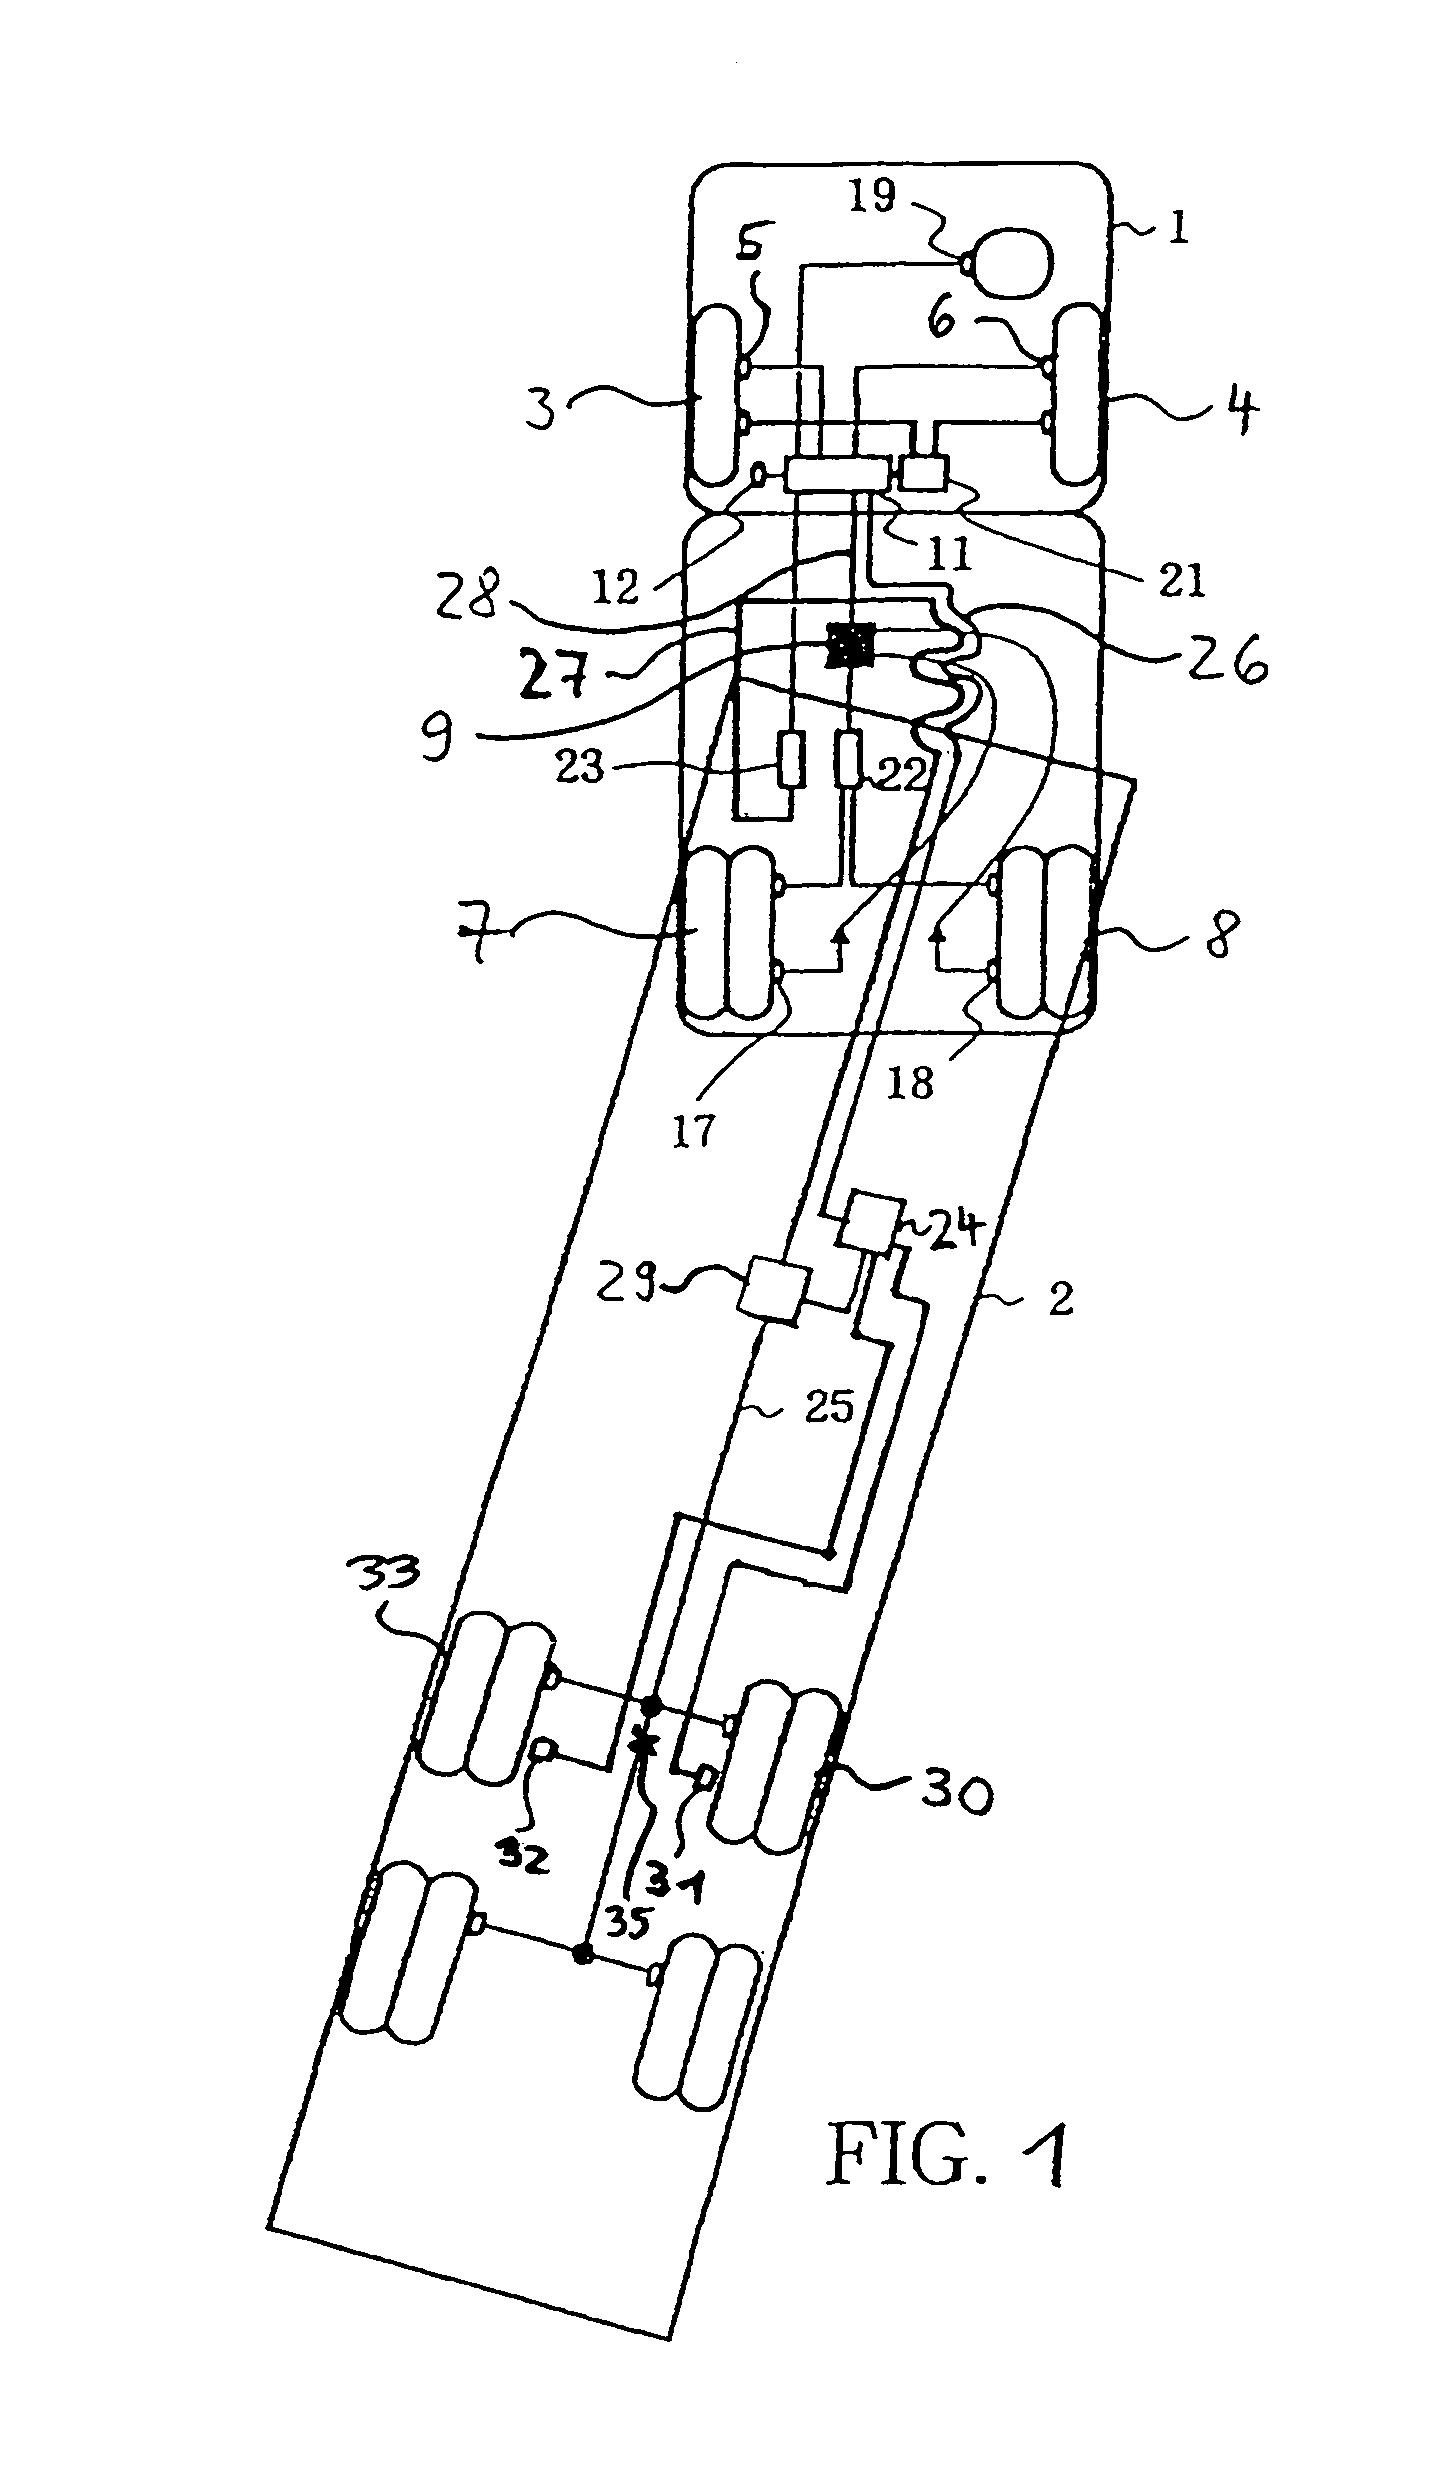 Vehicle-dynamics control method and system for a vehicle train